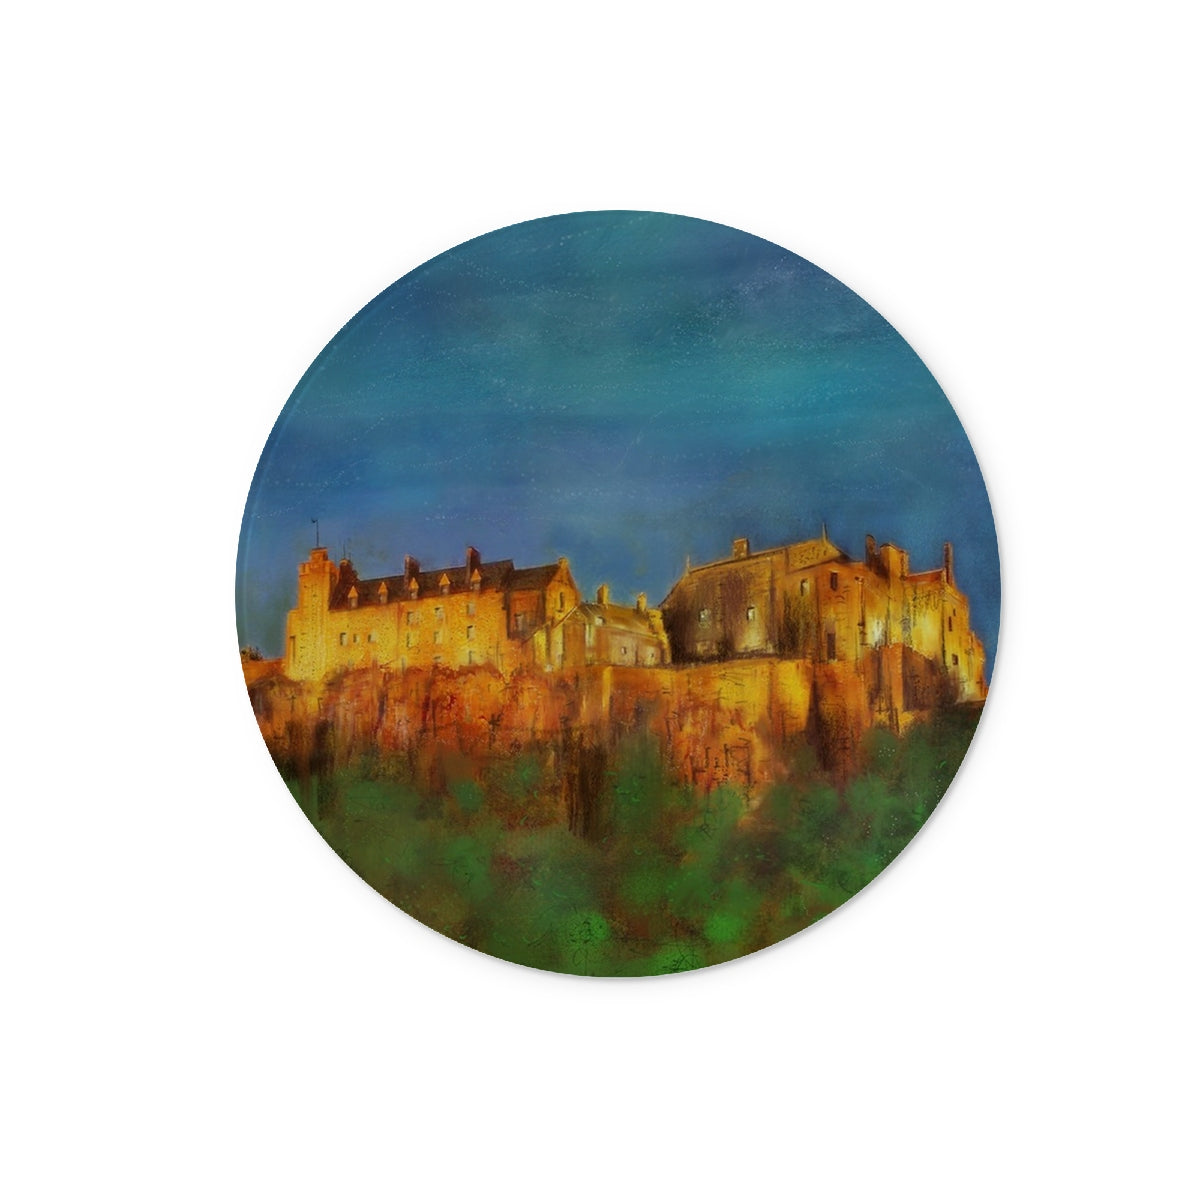 Stirling Castle Art Gifts Glass Chopping Board-Glass Chopping Boards-Historic & Iconic Scotland Art Gallery-12" Round-Paintings, Prints, Homeware, Art Gifts From Scotland By Scottish Artist Kevin Hunter